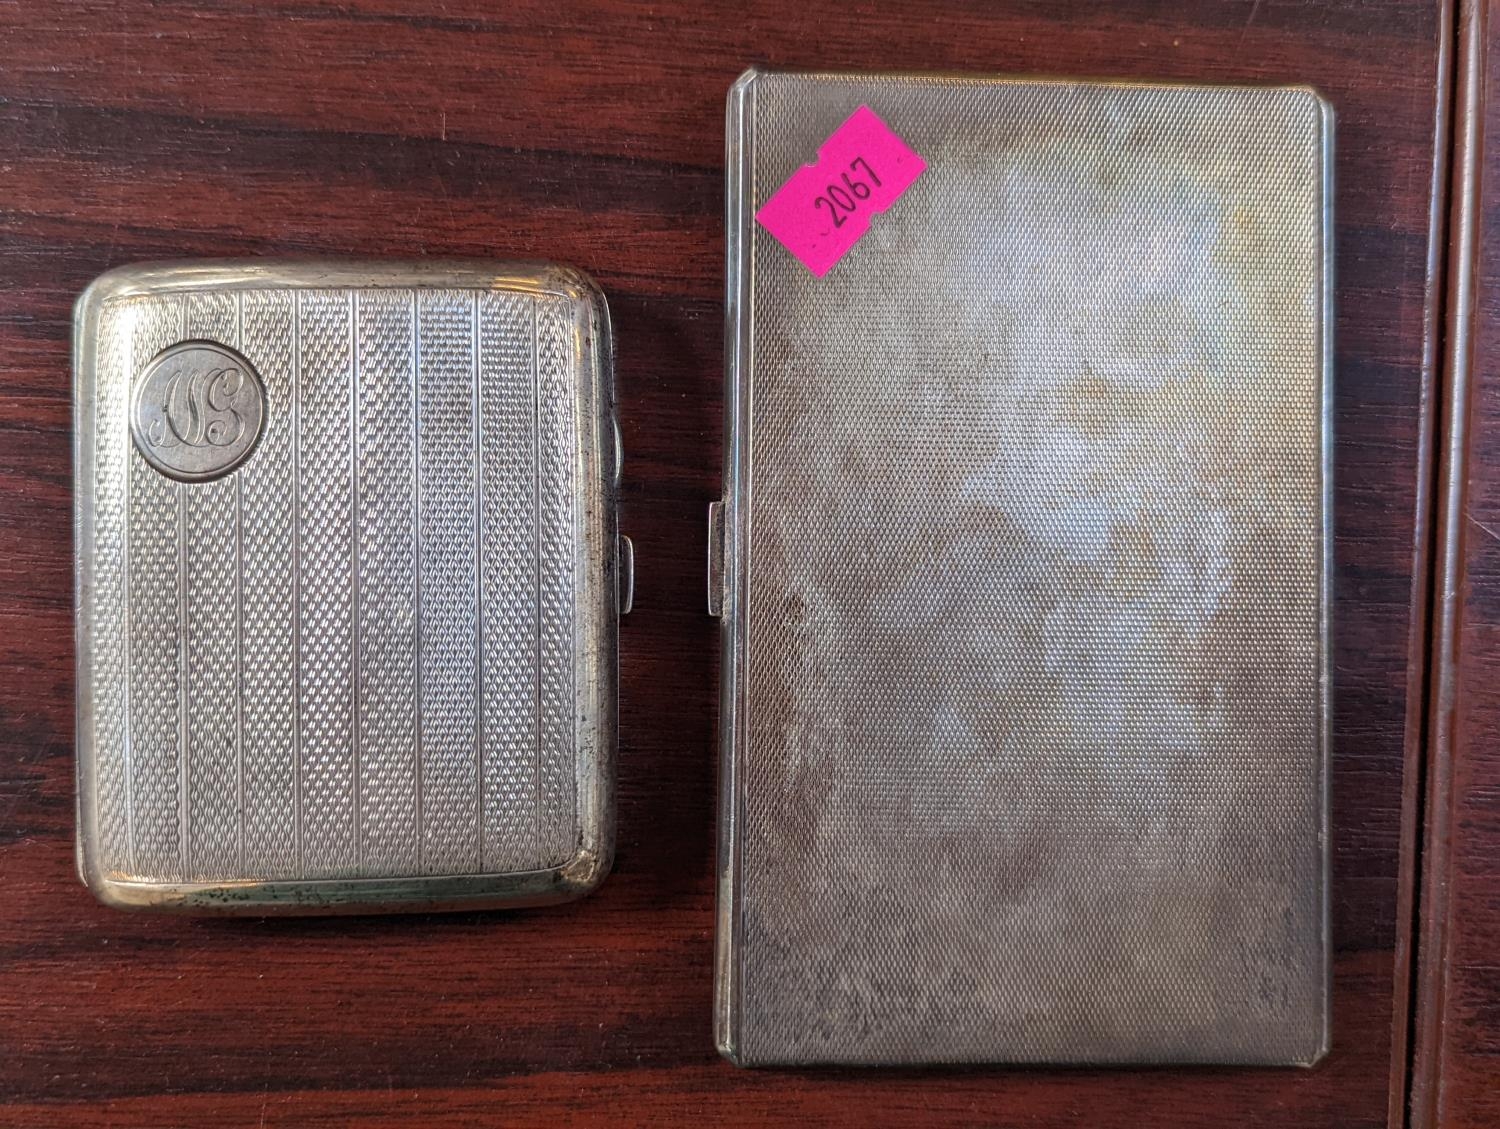 Good quality Rectangular SIlver machined cigarette case Birmingham 1939 and another curved SIlver